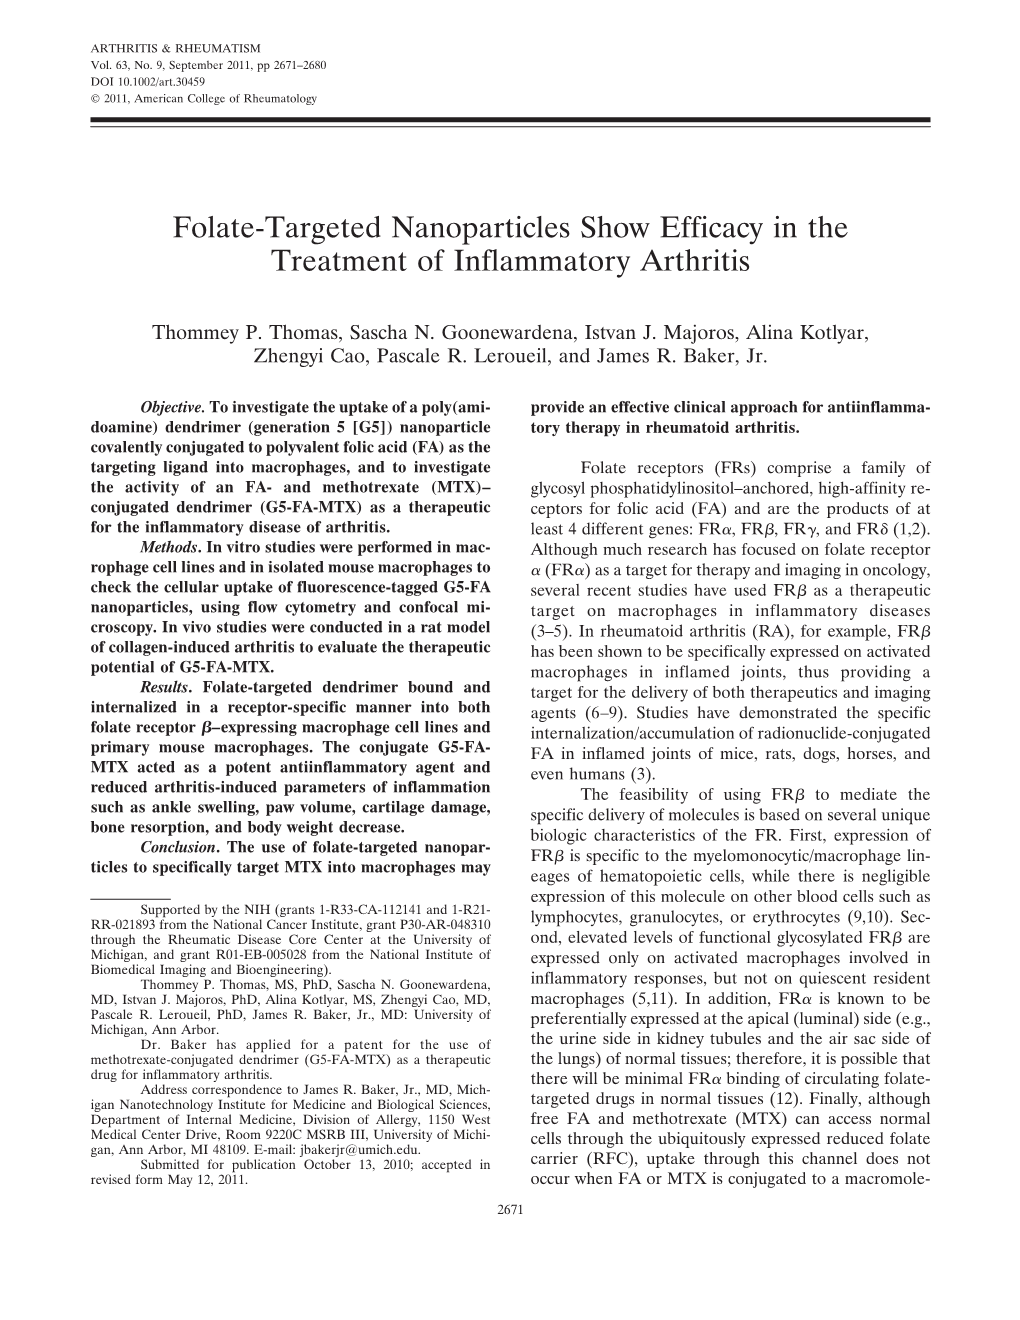 Folatetargeted Nanoparticles Show Efficacy in the Treatment Of